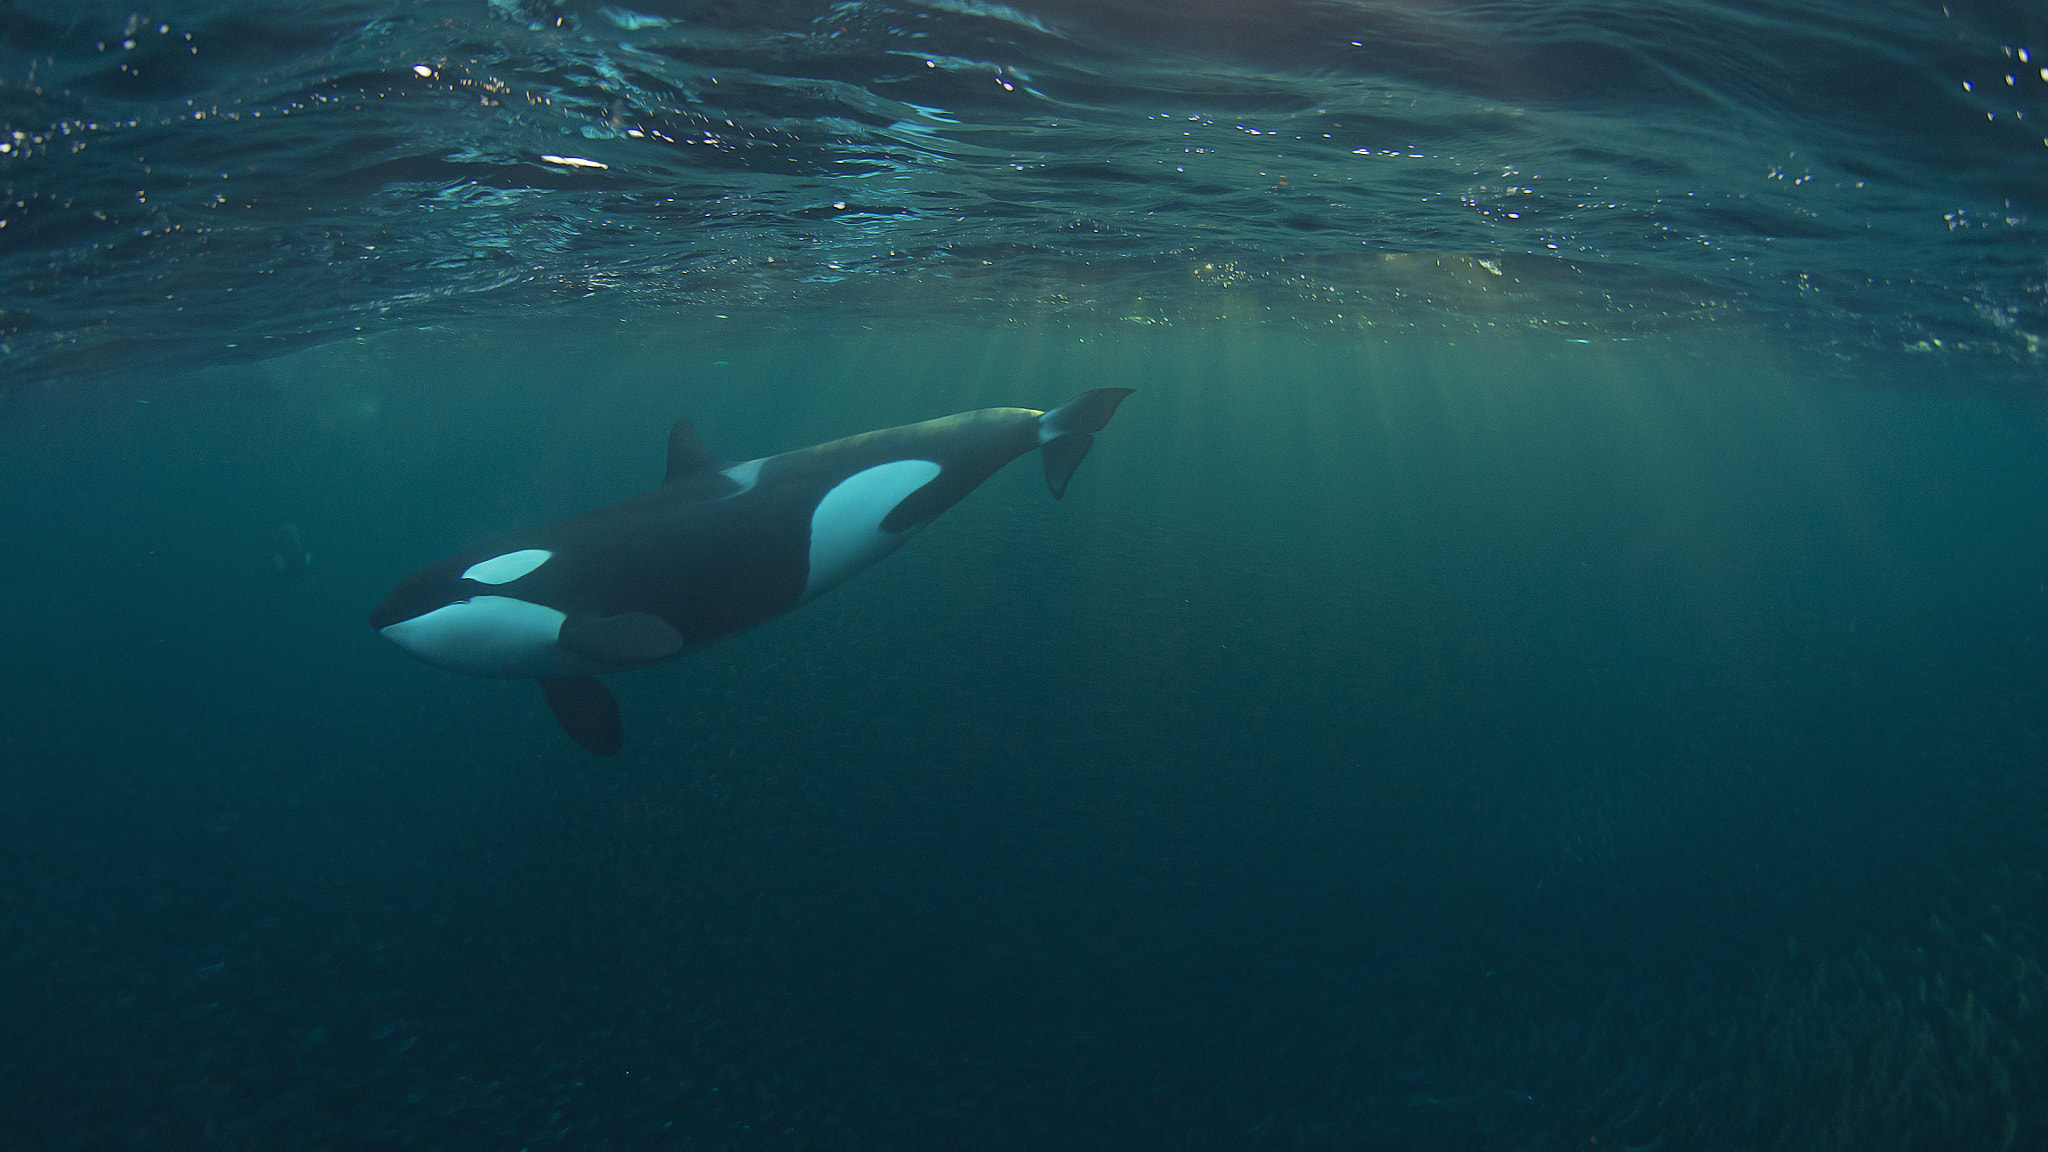 Olympus PEN E-PL5 sample photo. Swimming with orca's out in the free photography